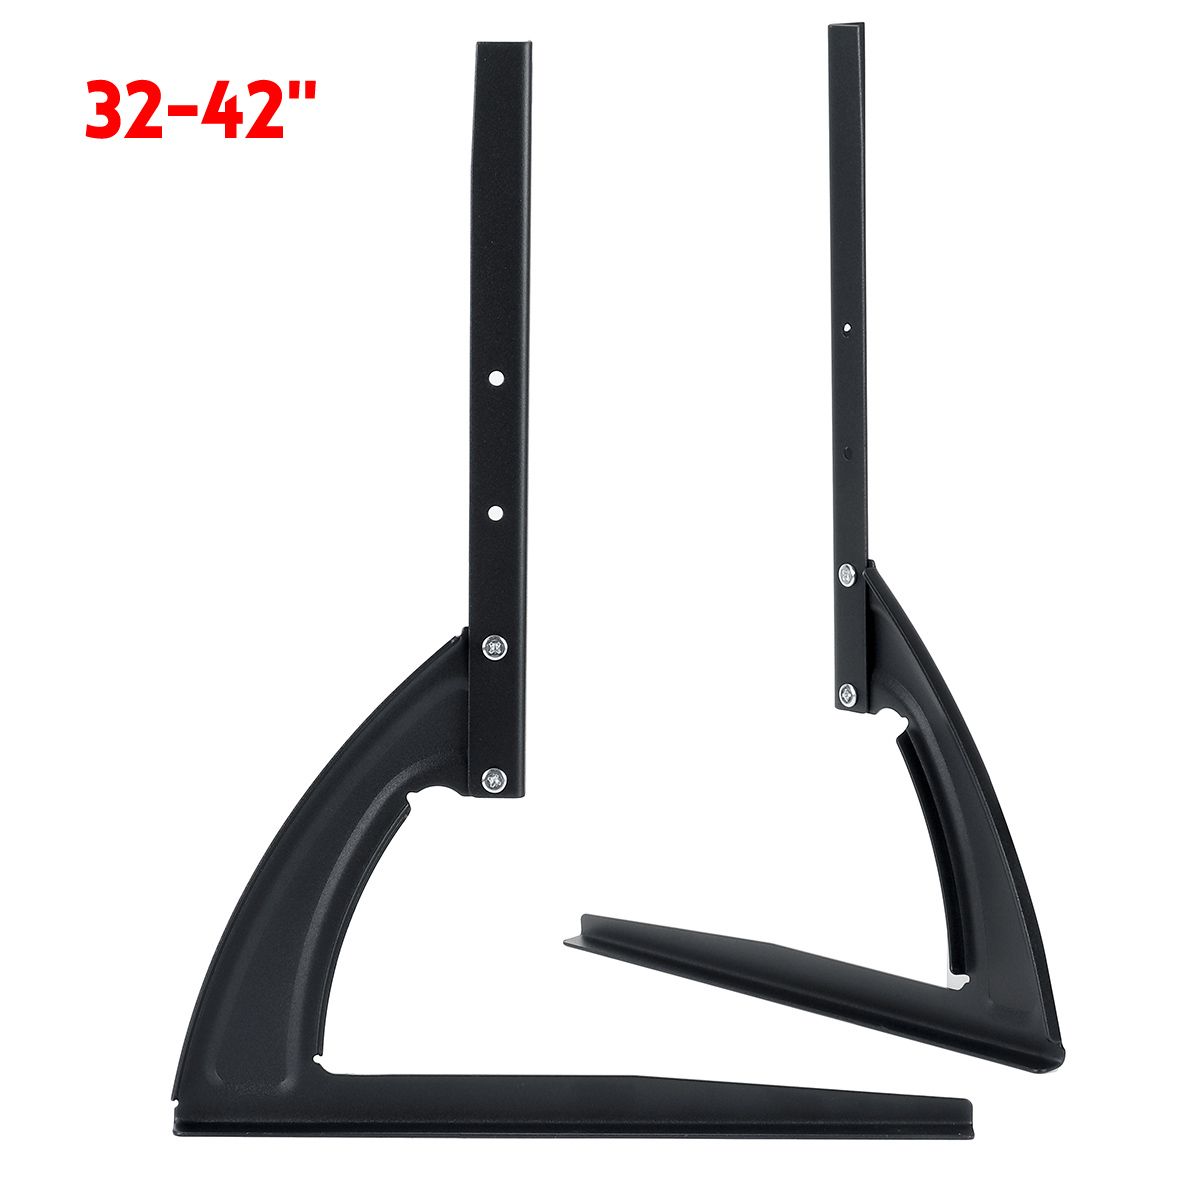 Universal-Table-Top-TV-Stand-Bracket-Mount-Television-Base-Holder-For-32-75-inch-LCD-Flat-Screen-Hei-1749871